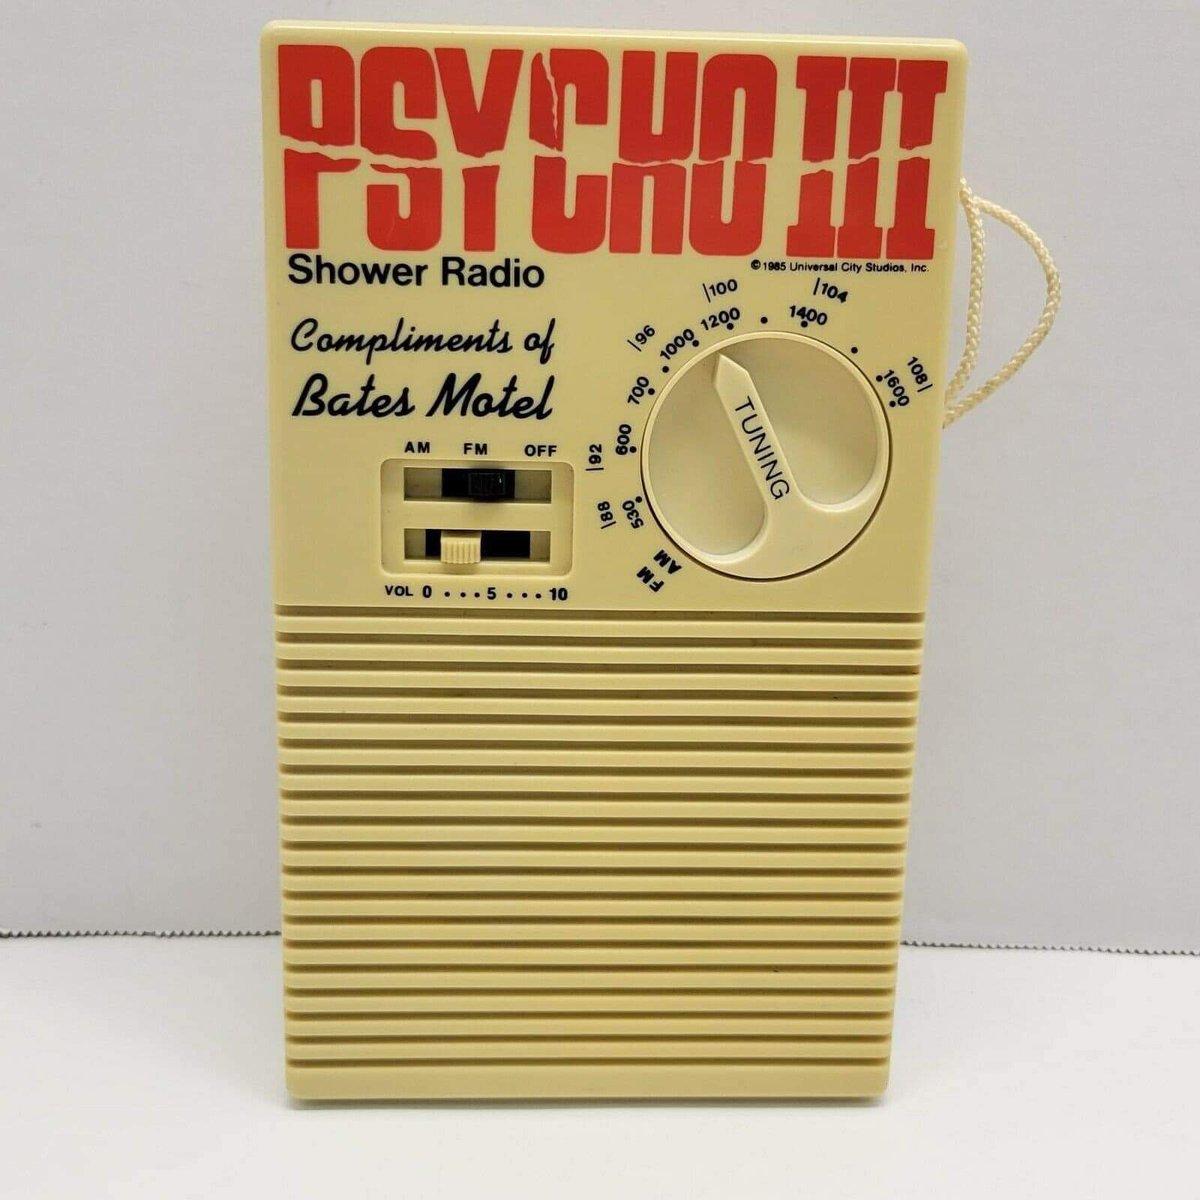 Promo Merch from PSYCHO III (1985, Universal) Compliments of the Bates Motel, your very own Waterproof Shower Radio! Turn it up as loud as you want! 😁 (So Norman can enter unnoticed. 😱) #Psycho #Psycho3 #BatesMotel #80s #80shorror #HorrorCommunity #HorrorFam #HorrorMovies